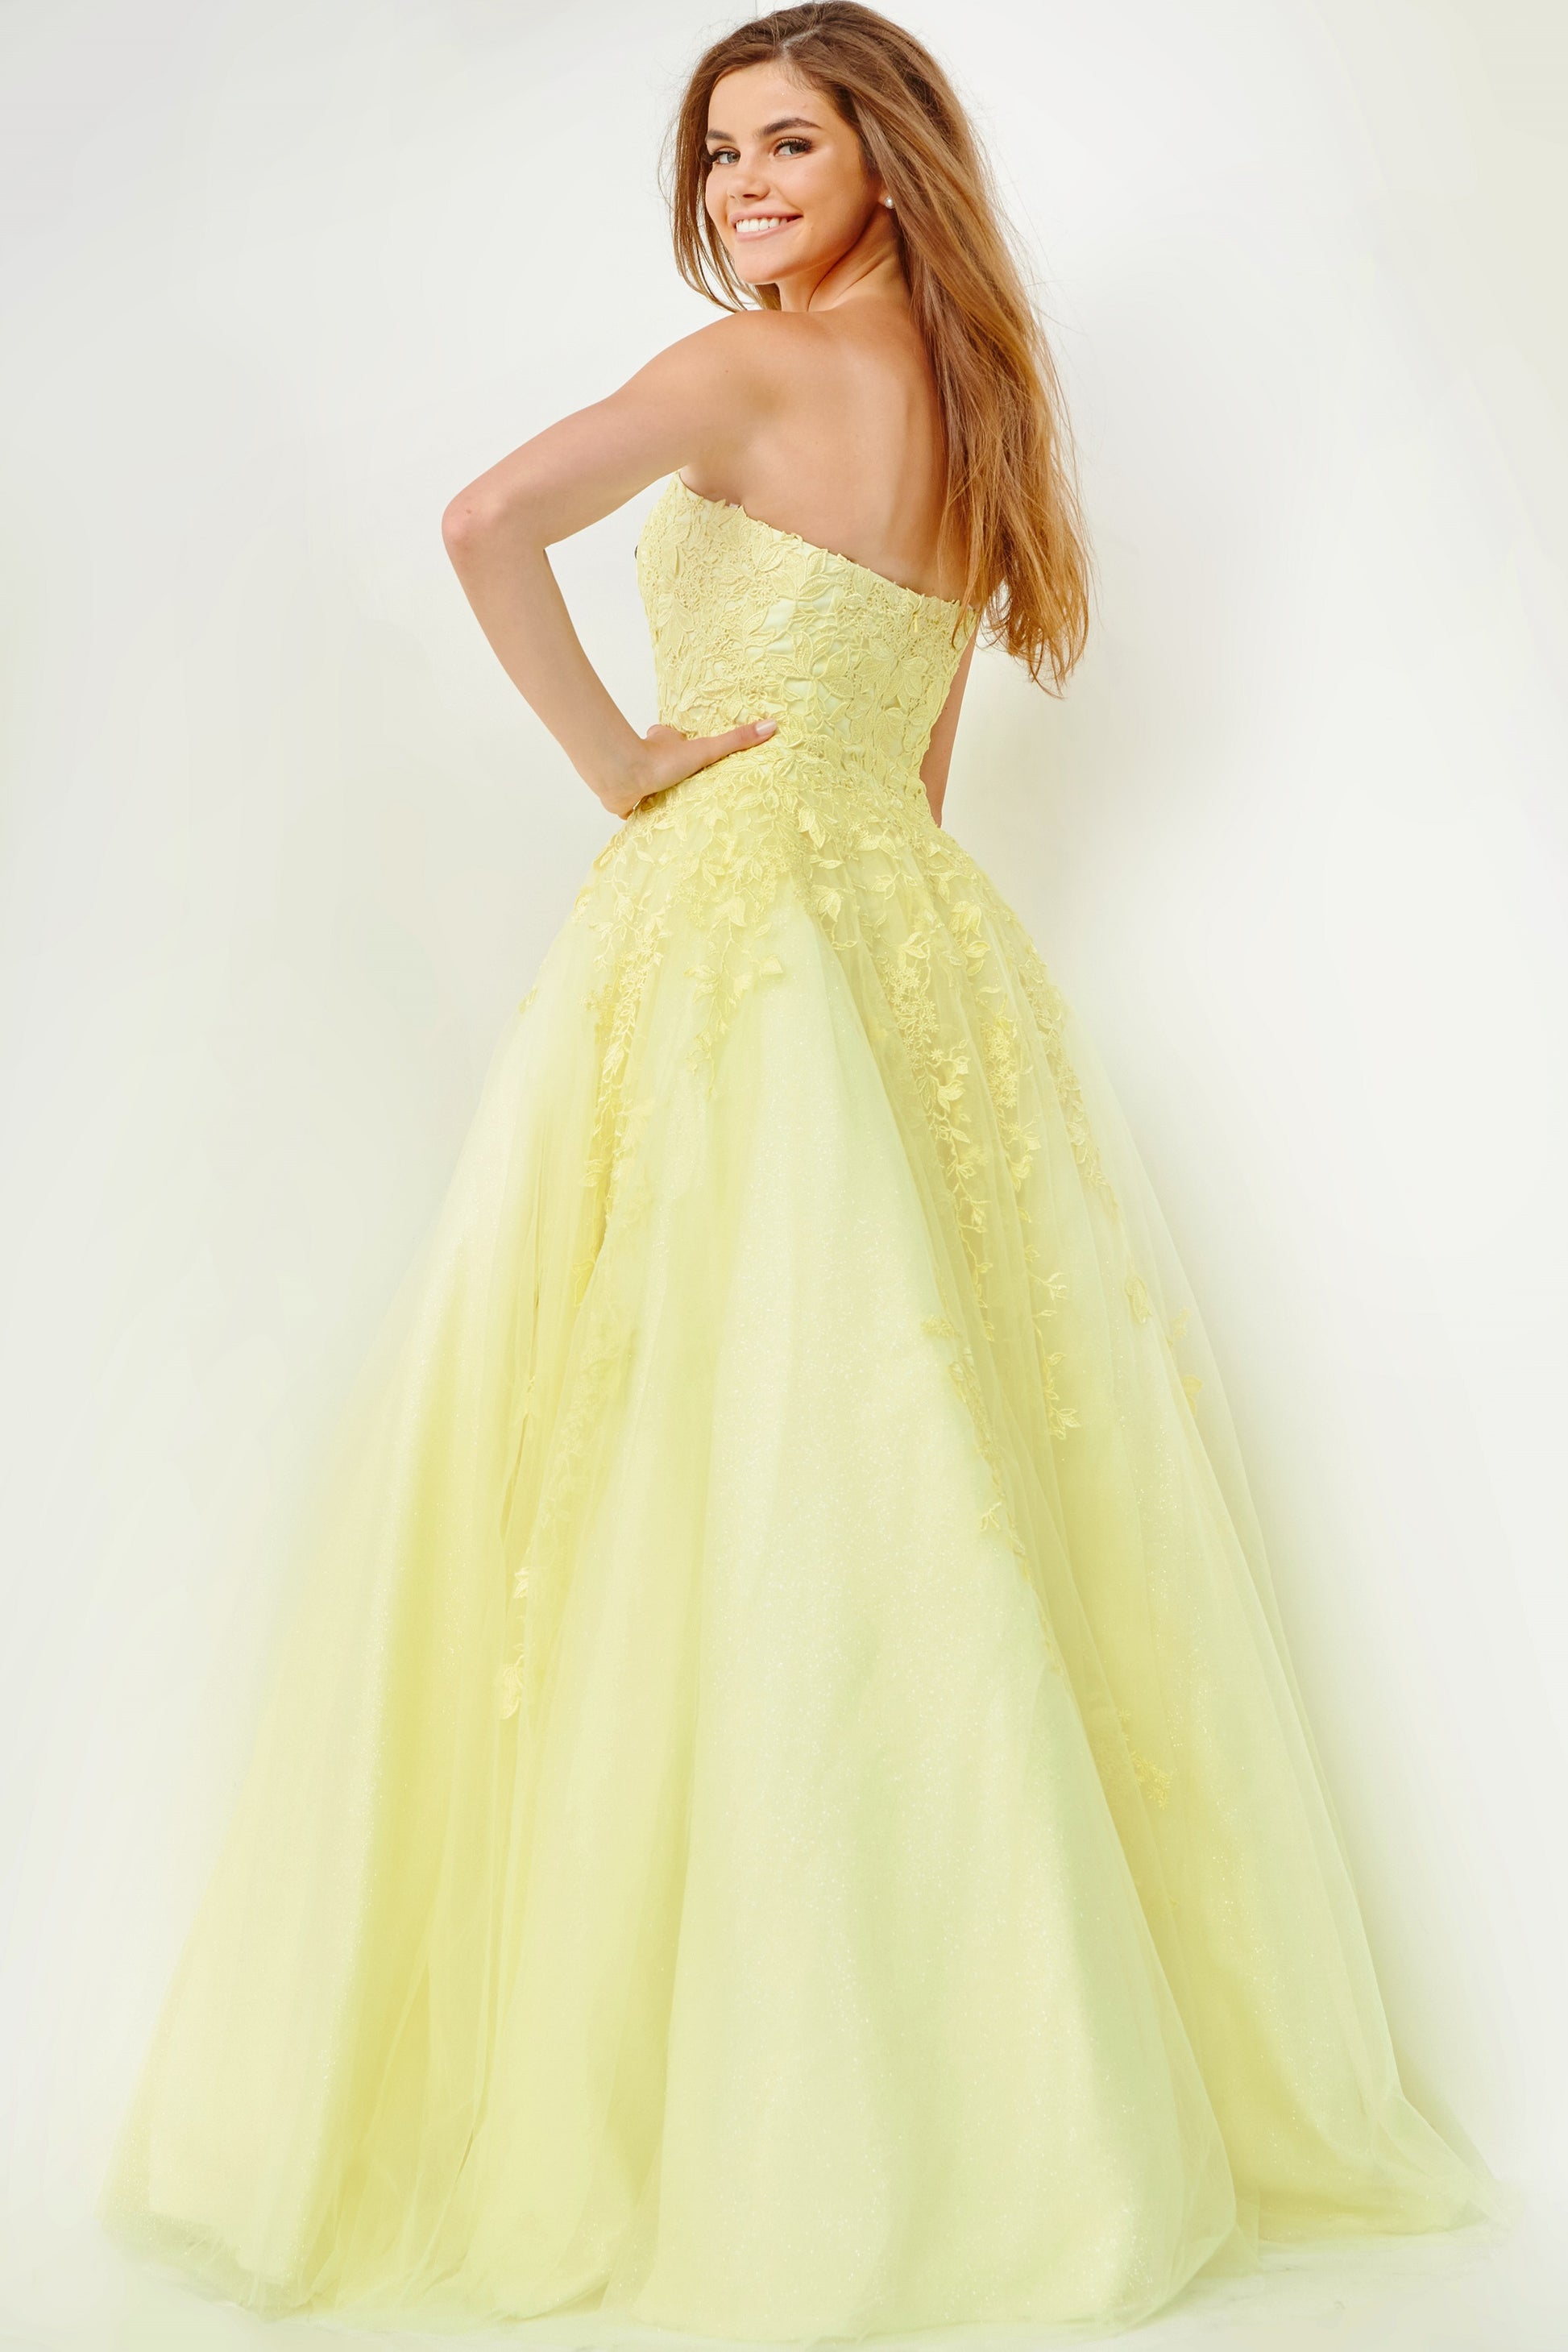 Jovani JVN1831 is a Long Tulle Ball Gown Prom Dress with a fitted strapless bodice with floral embroidering. Embroidering cascades down into the skirt of this ballgown evening gown. Also makes a perfect informal wedding dress. JVN by Jovani 1831 